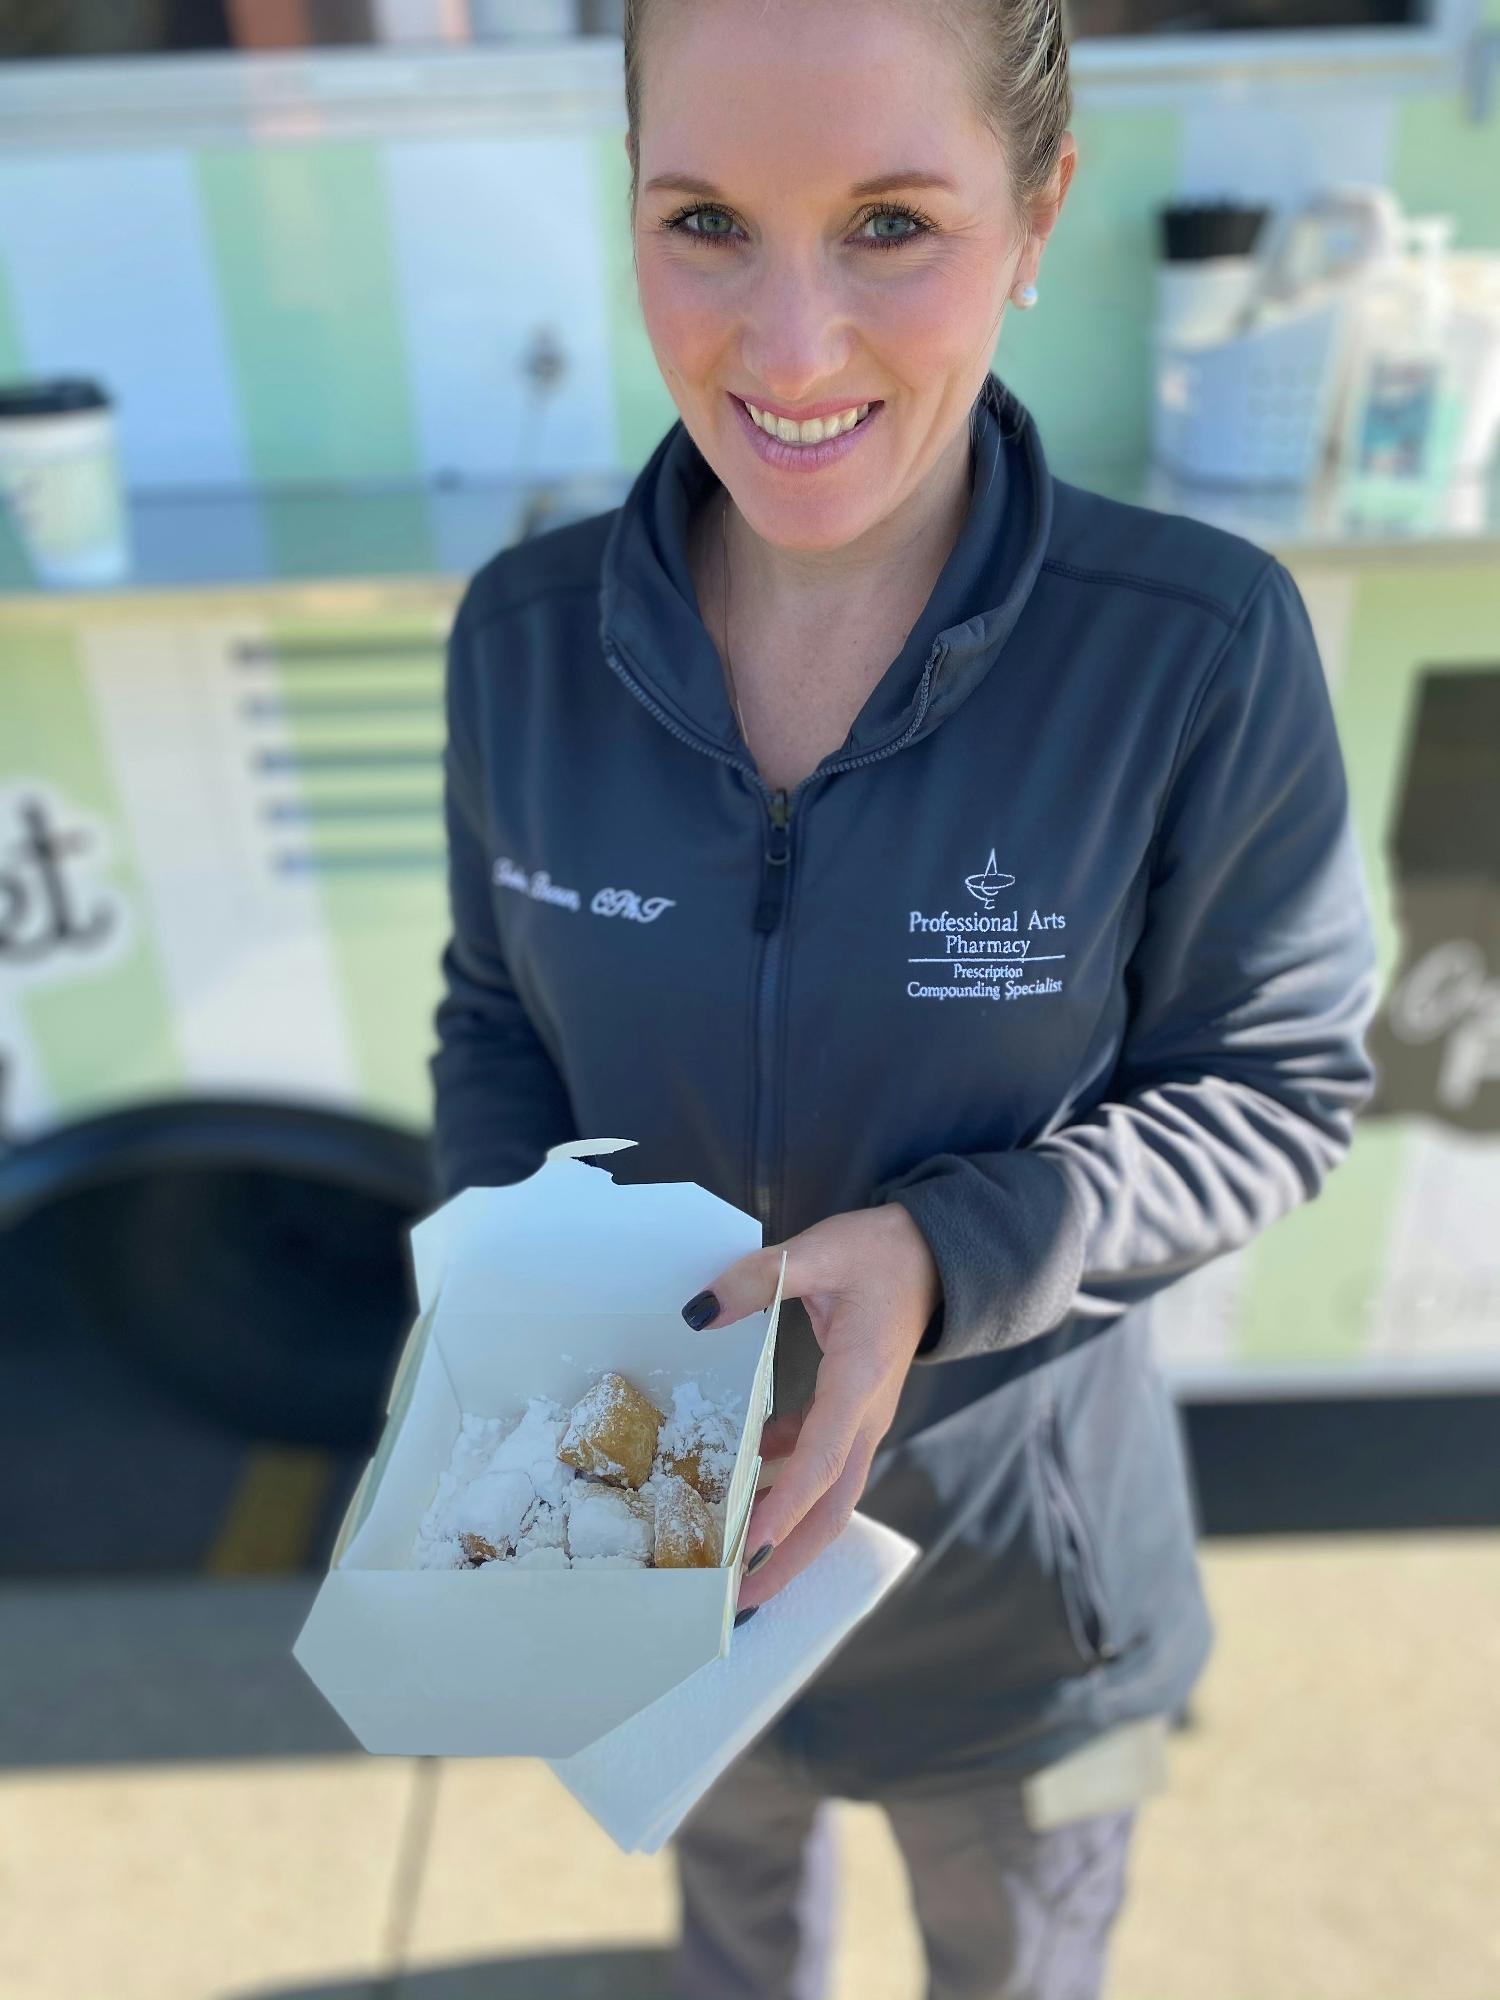 Due to COVID, instead of our traditional holiday lunches, employees enjoyed a food truck of beignets to enjoy in the sun